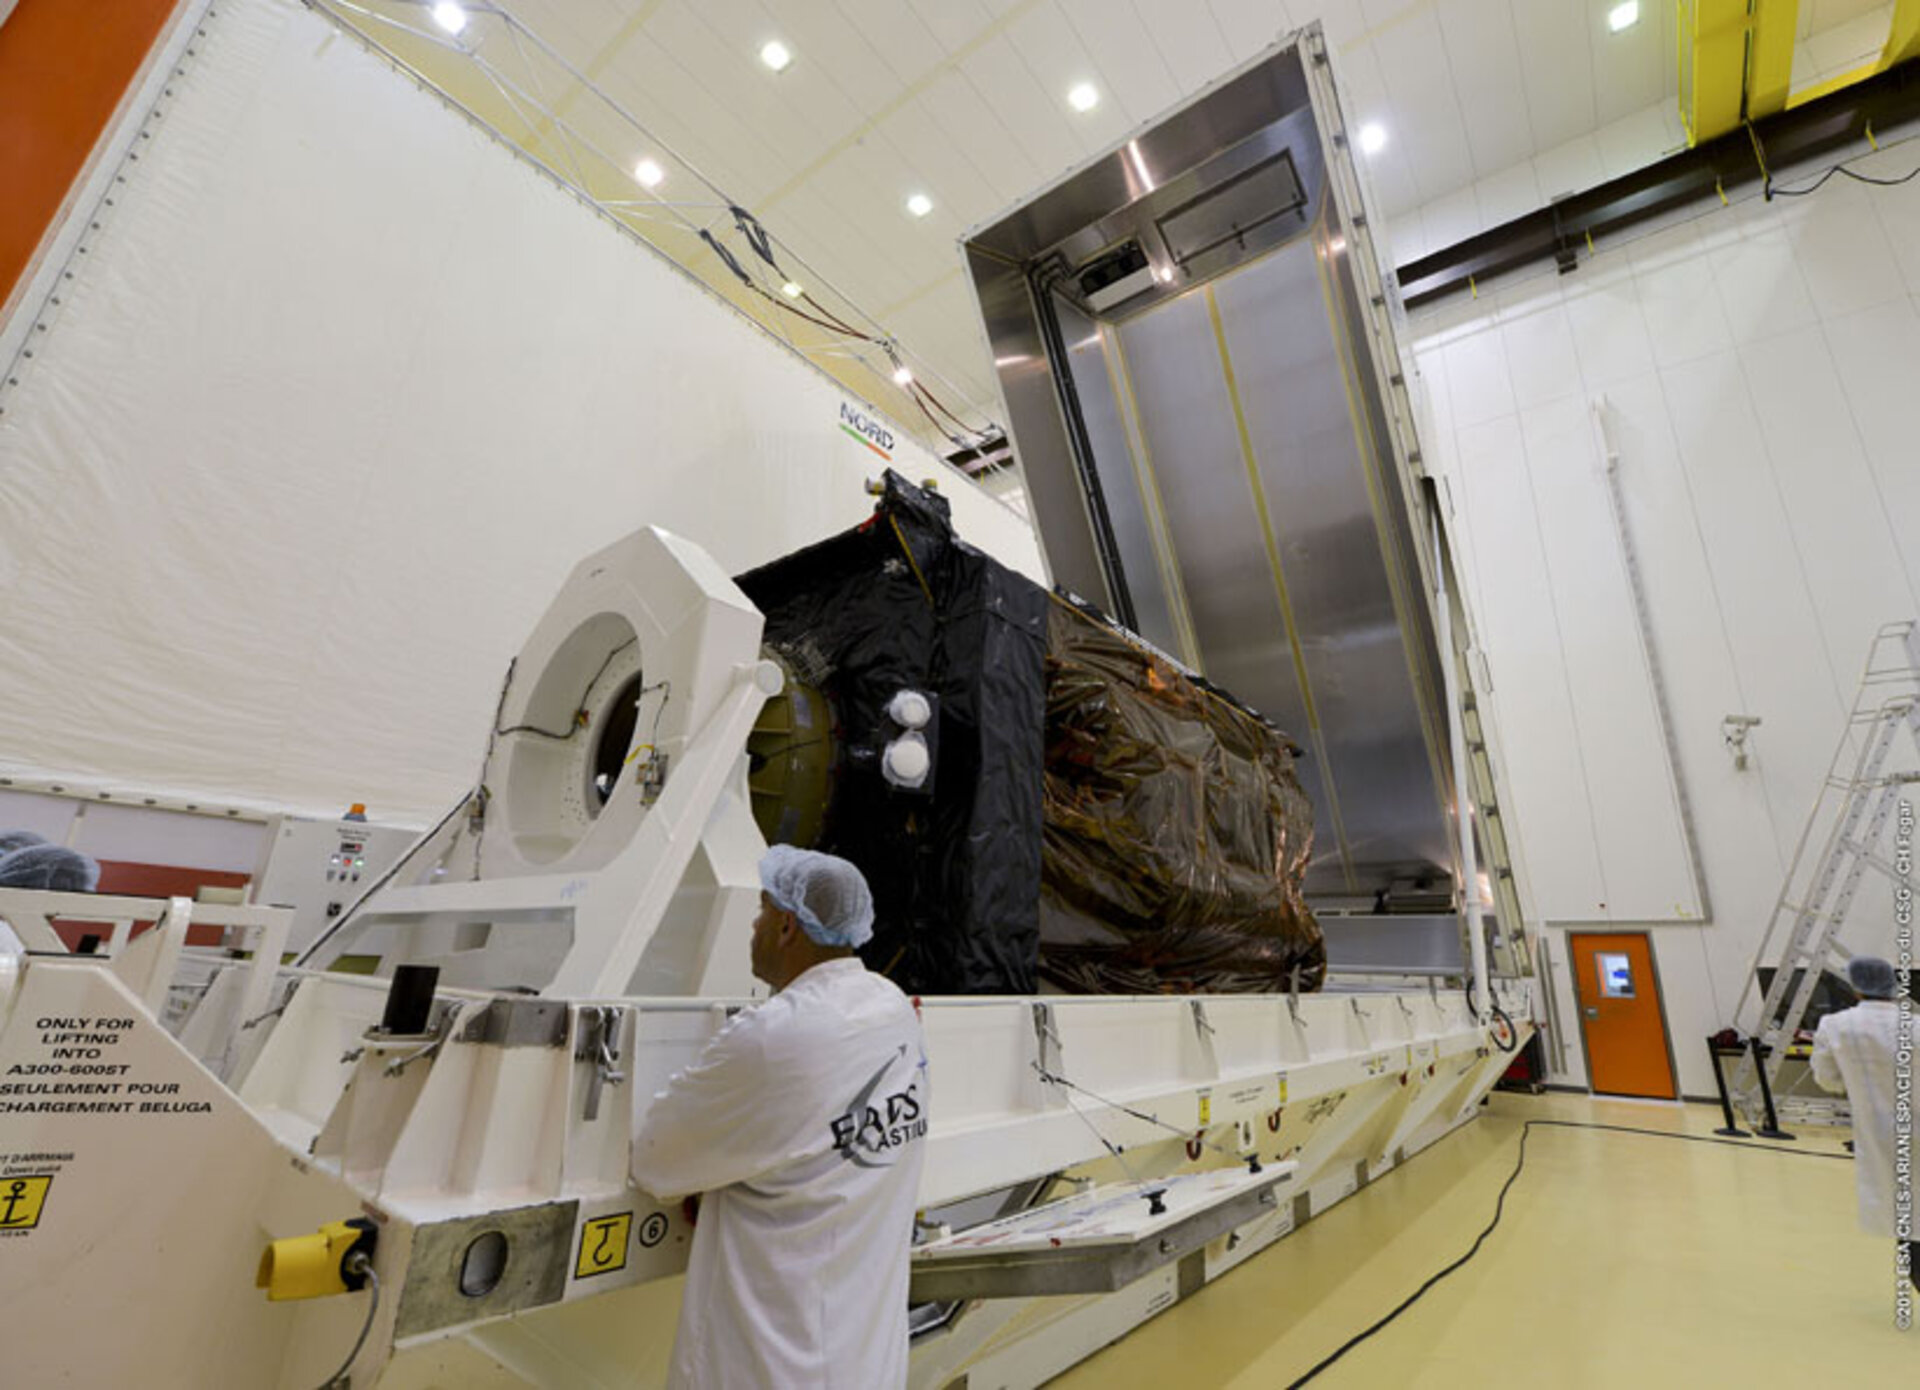 Alphasat being removed from container